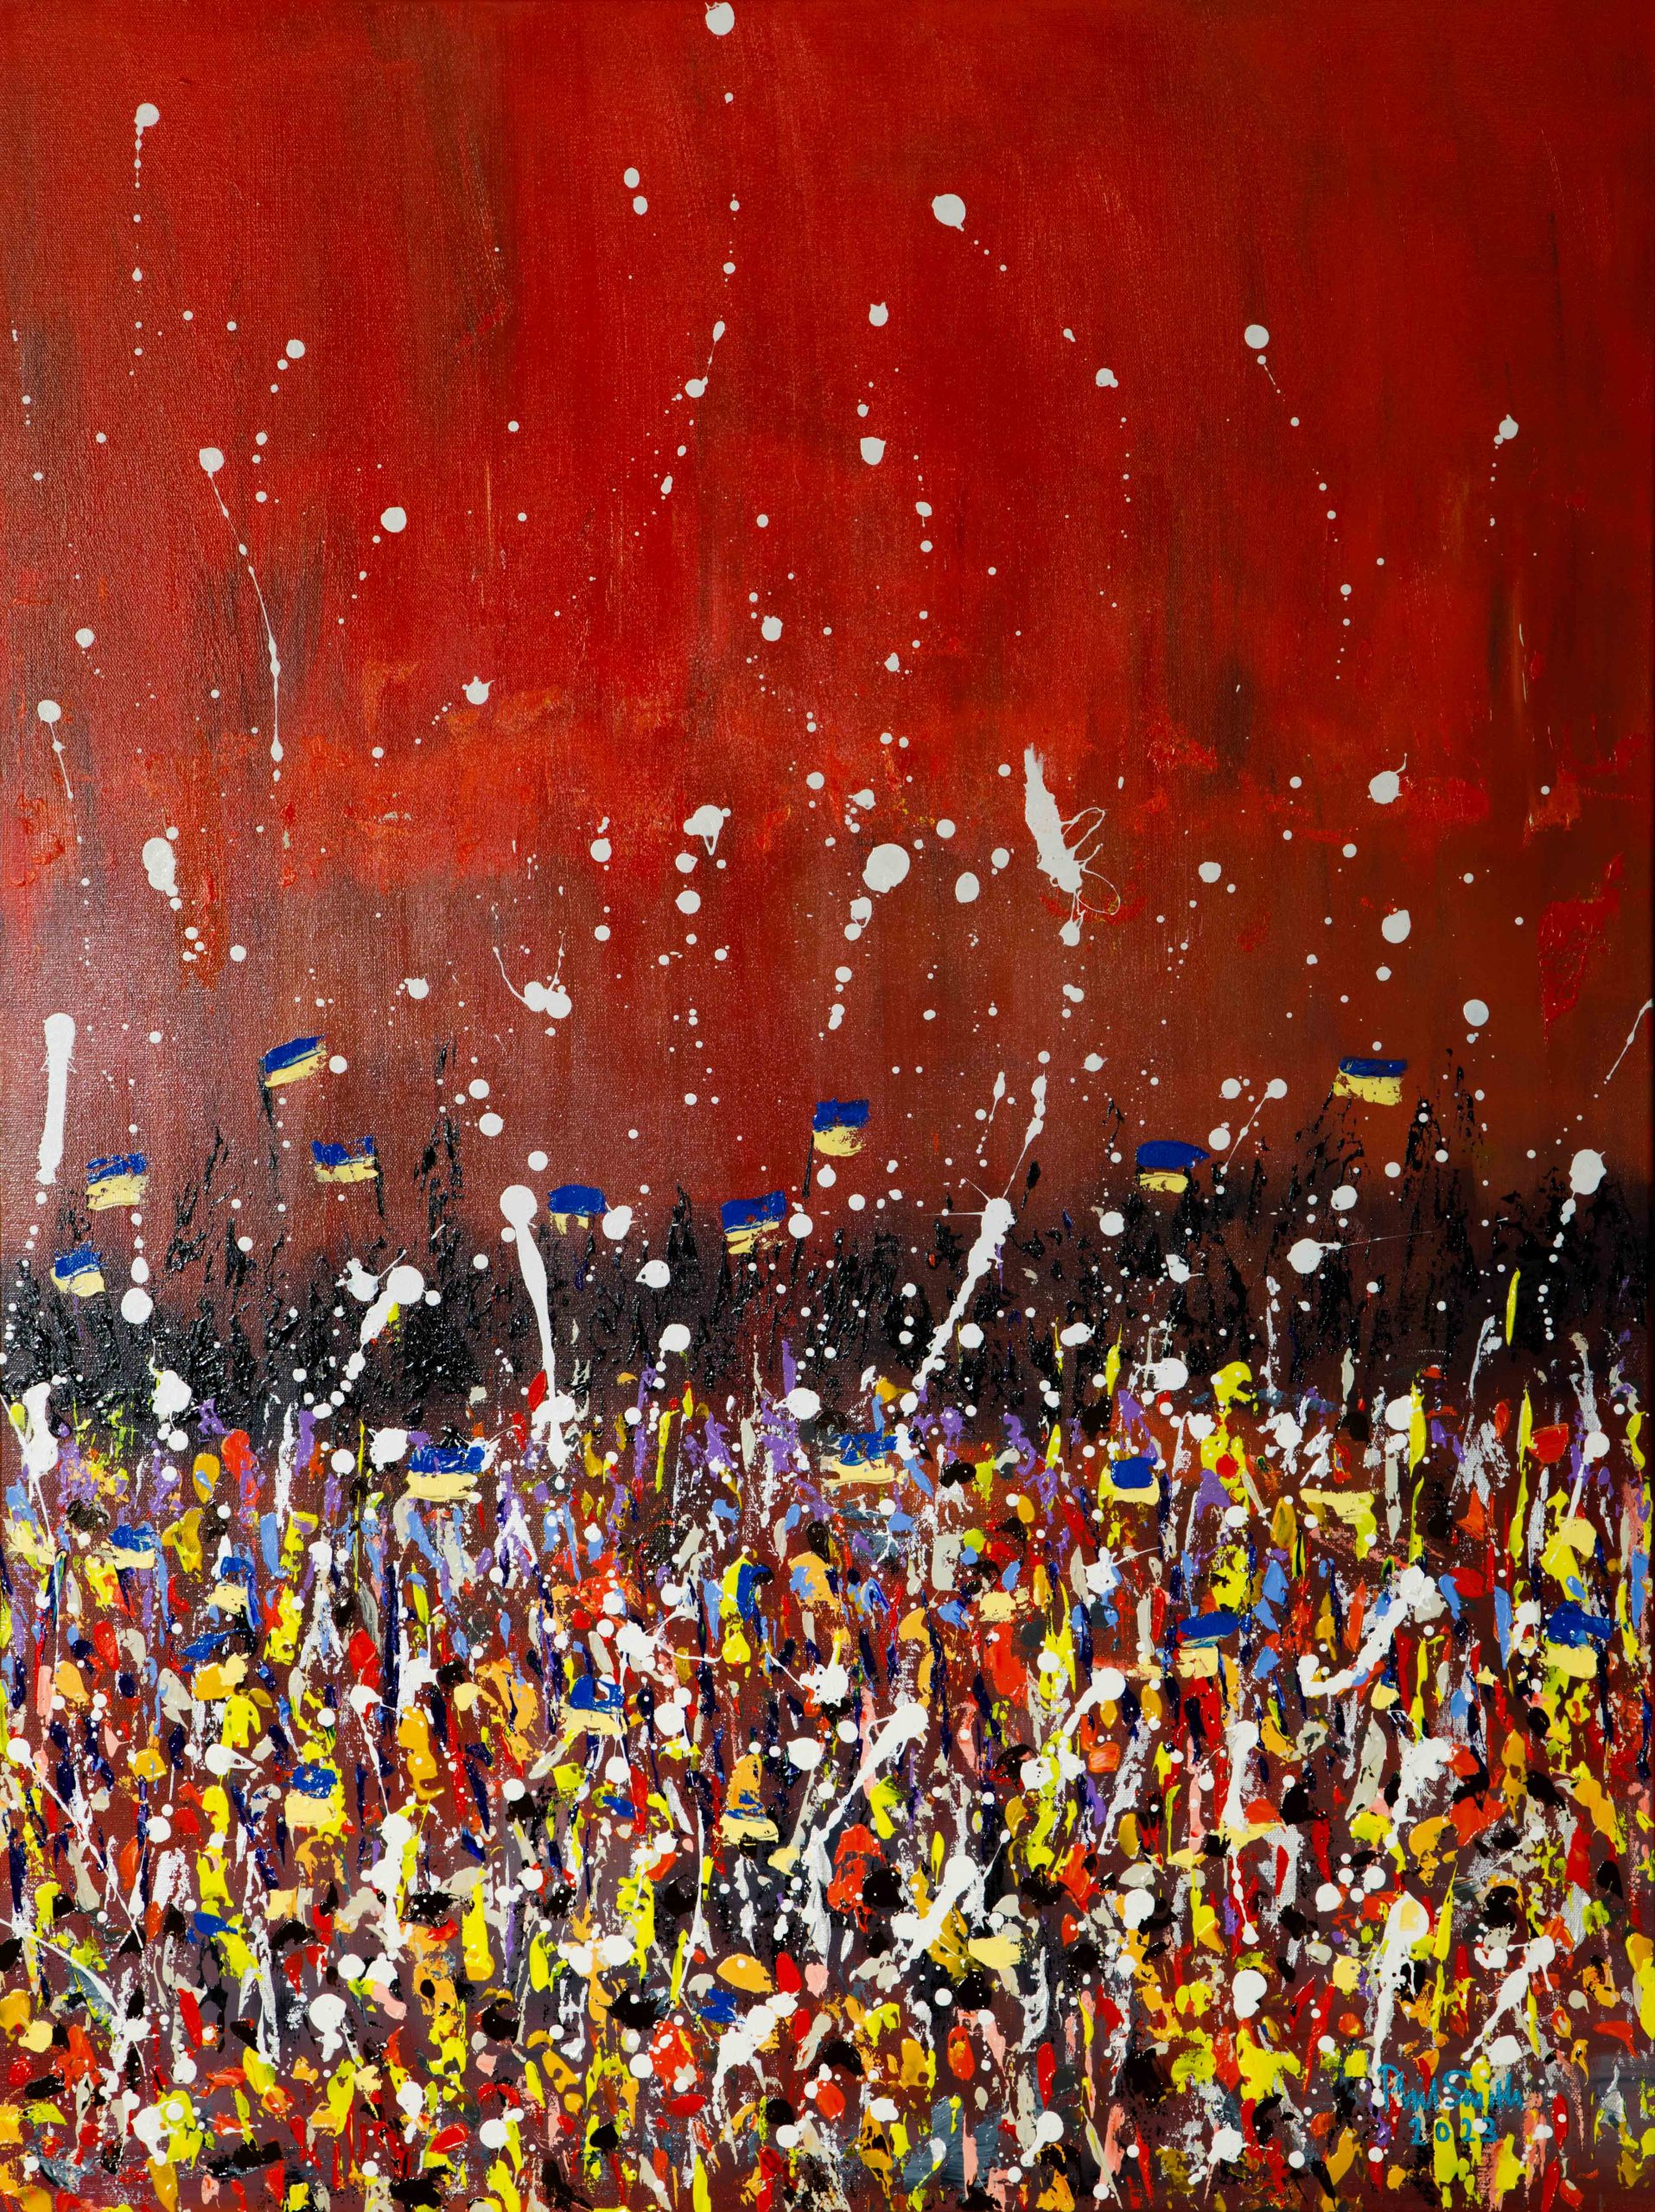 A highly abstracted Festival scene, imagining the end of the war in Ukraine. Ukraine flags are visible. The main colours are blue and yellow against a red background.